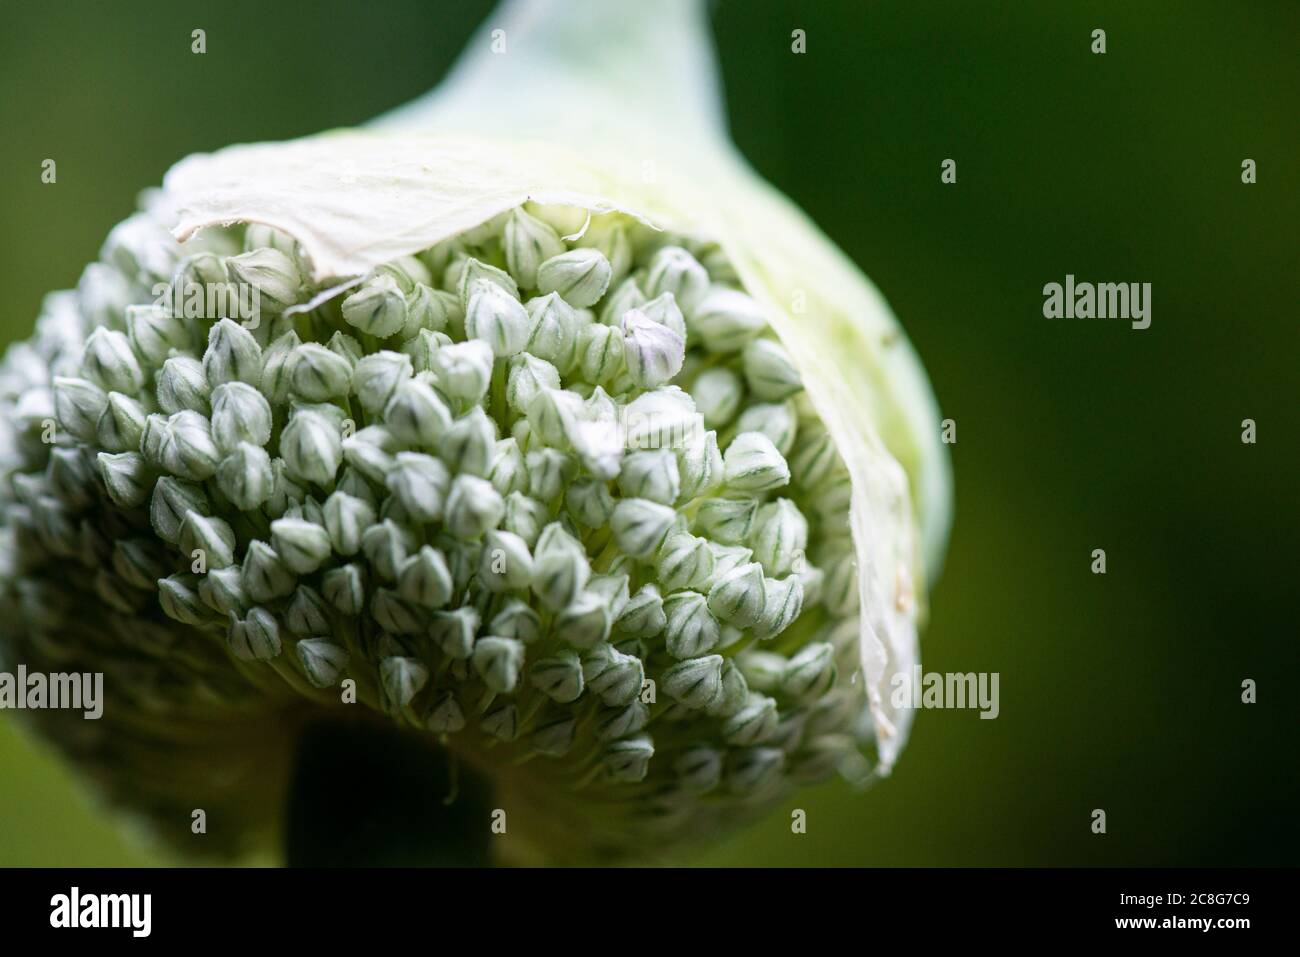 A close up of the flower head of a leek Stock Photo